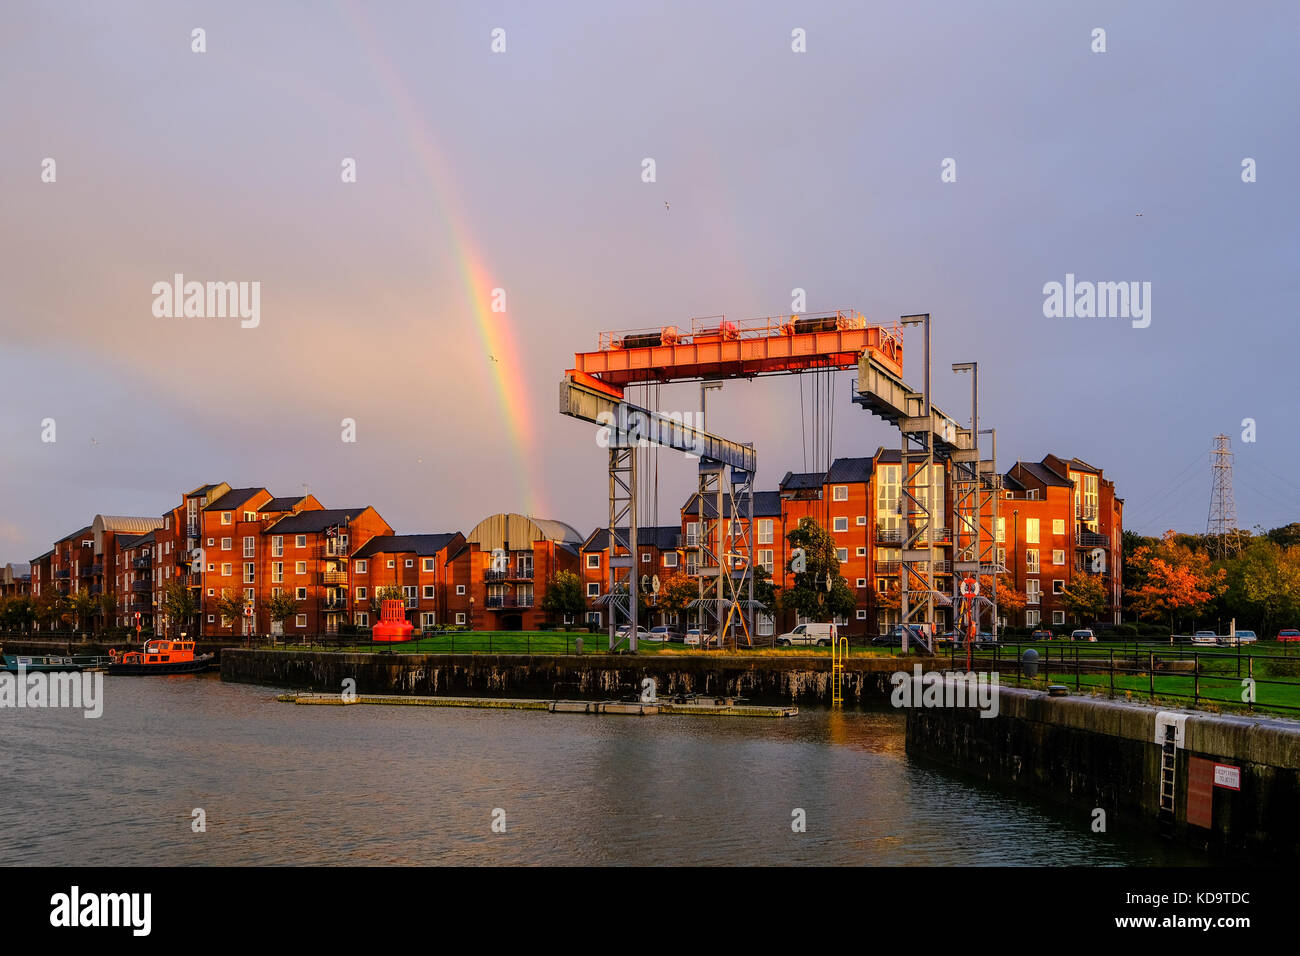 Preston, UK. 11th October 2017. UK Weather. After a wet day in Lancashire, the sun appeared briefly before sunset, creating a rainbow over Preston's Albert Dock.  The dock celbrated its 125th birthday this year and when built was the largest single dock in Europe. Credit: Paul Melling/Alamy Live News Stock Photo